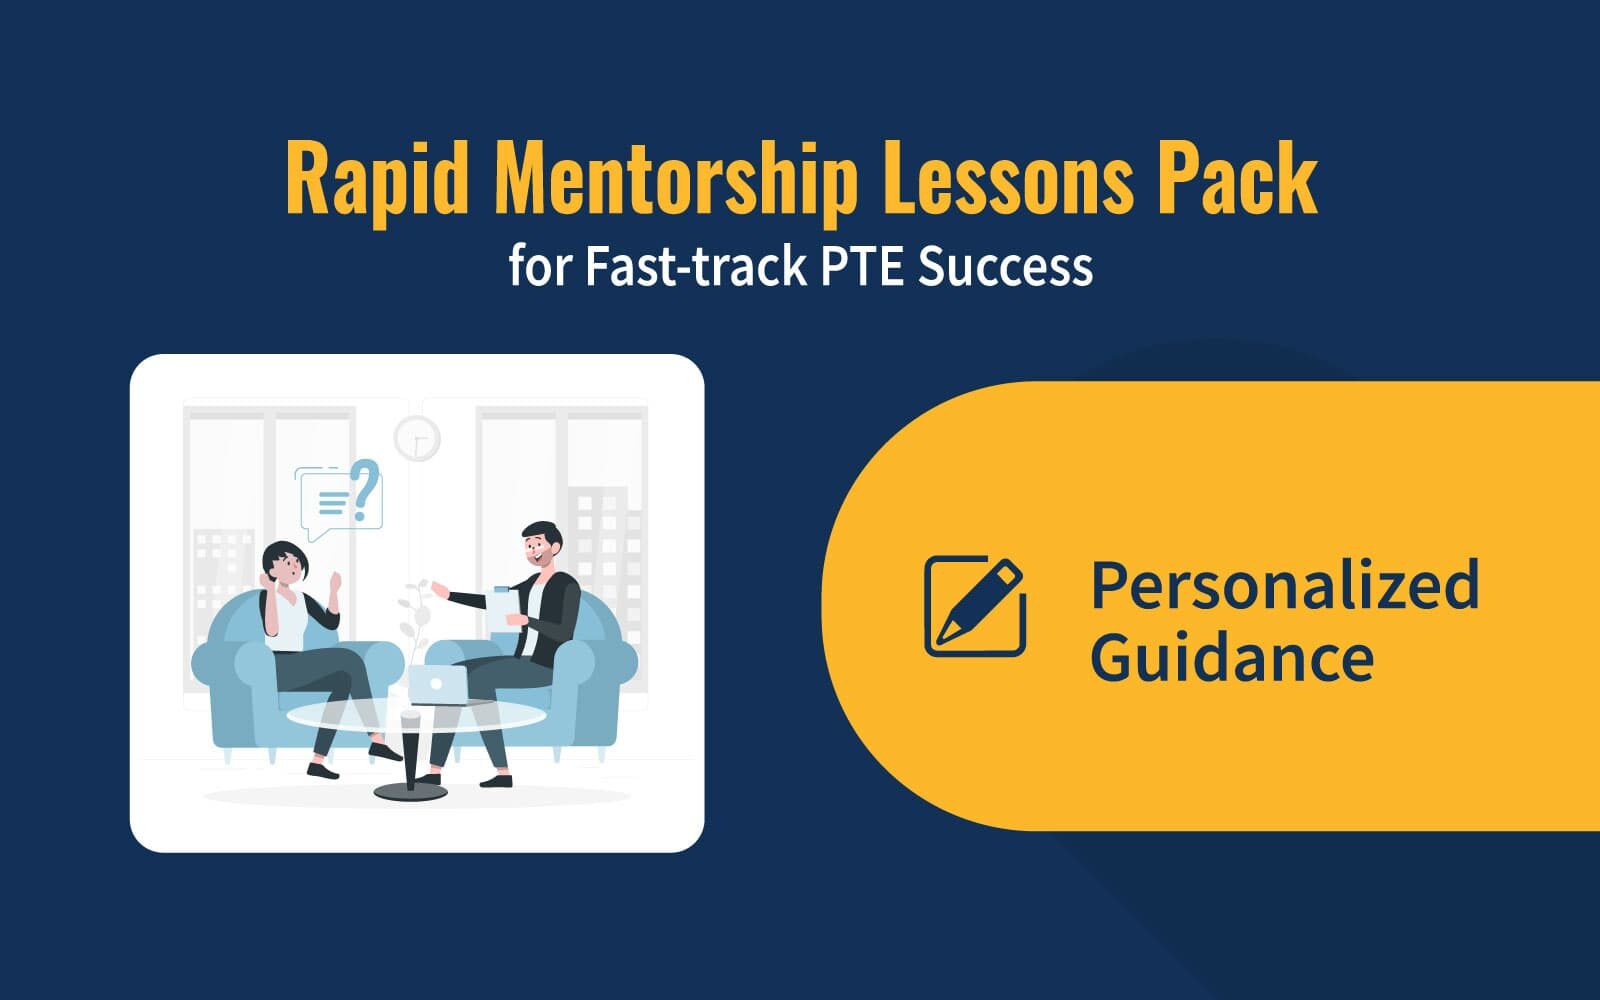 Rapid Mentorship Lessons Pack for Fast-track PTE Success